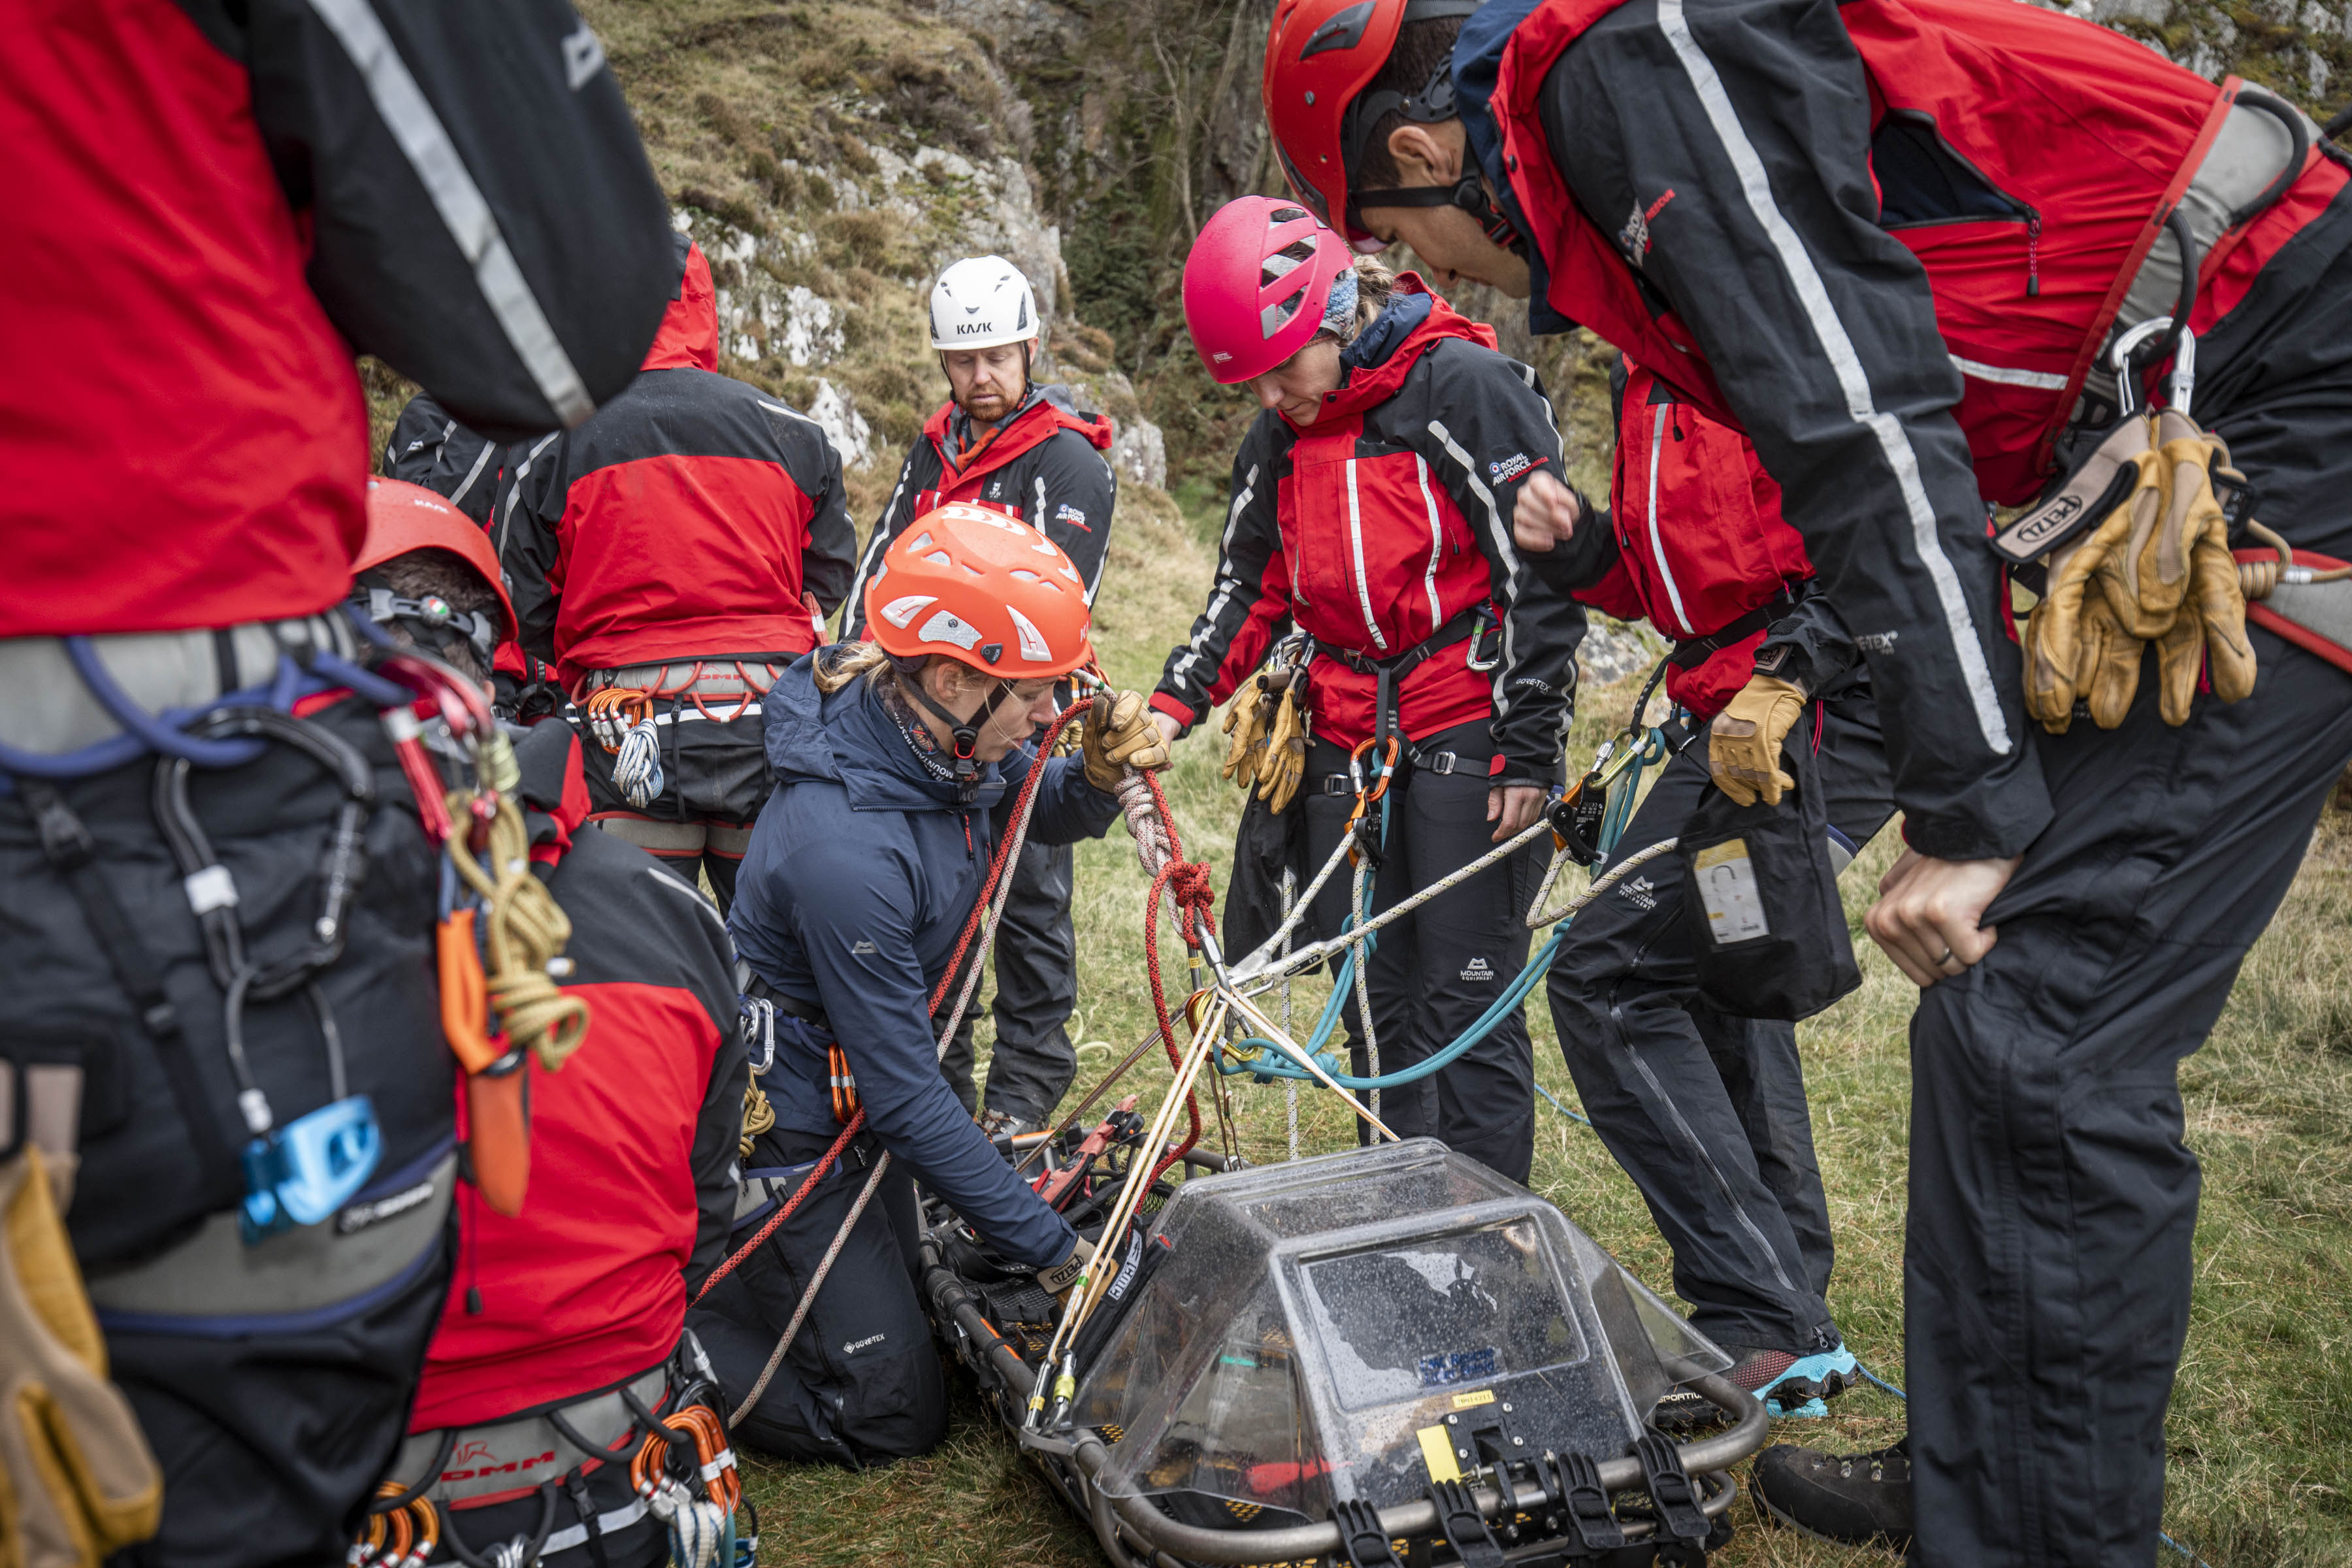 Image shows Search and Rescue team on mountain tending to patient. 